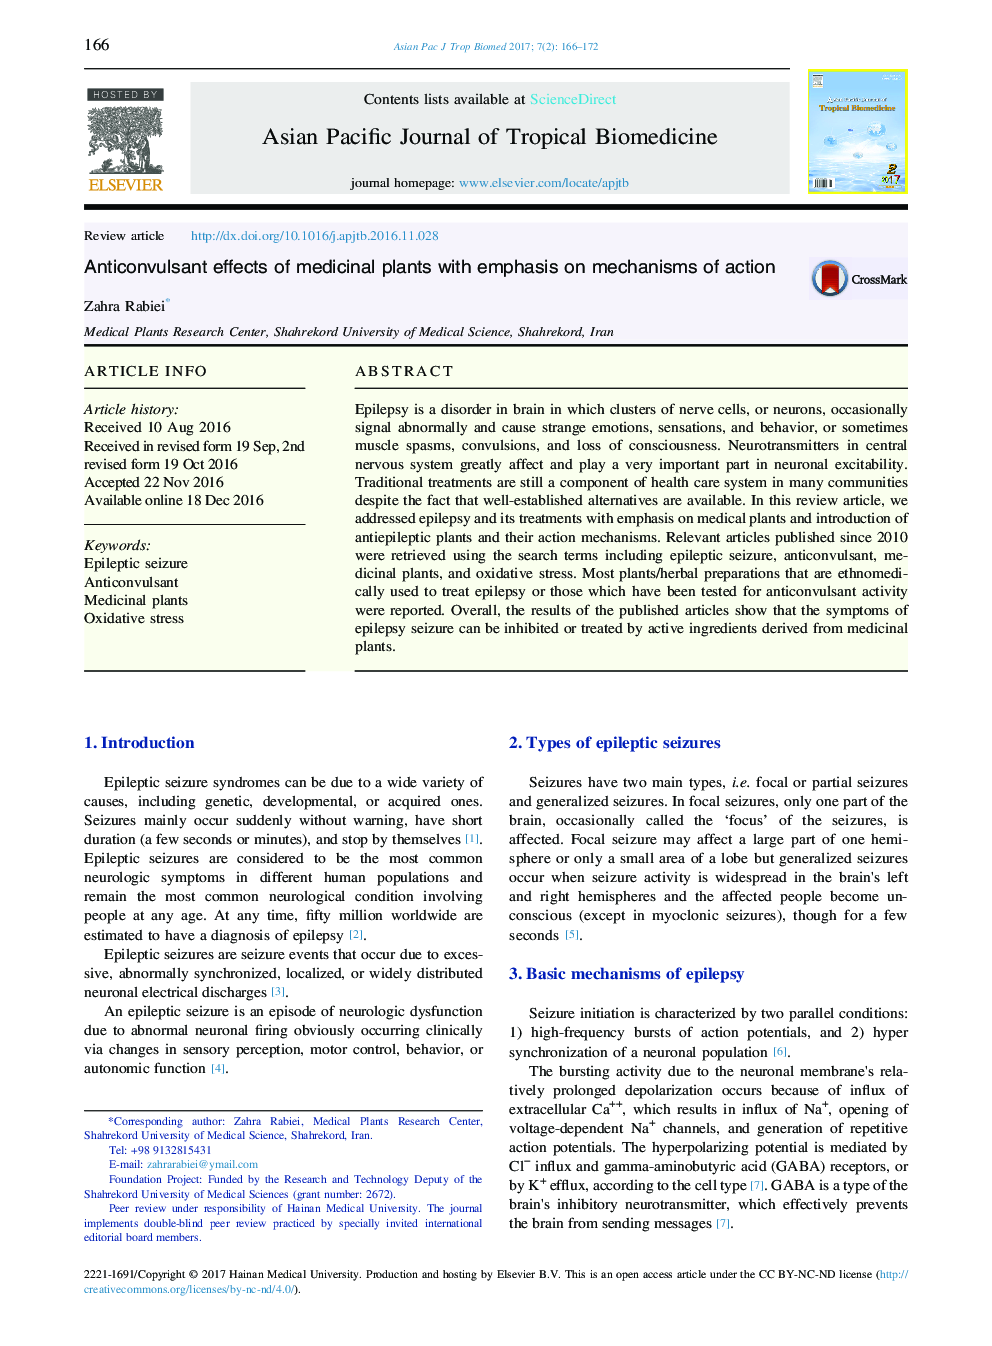 Anticonvulsant effects of medicinal plants with emphasis on mechanisms of action